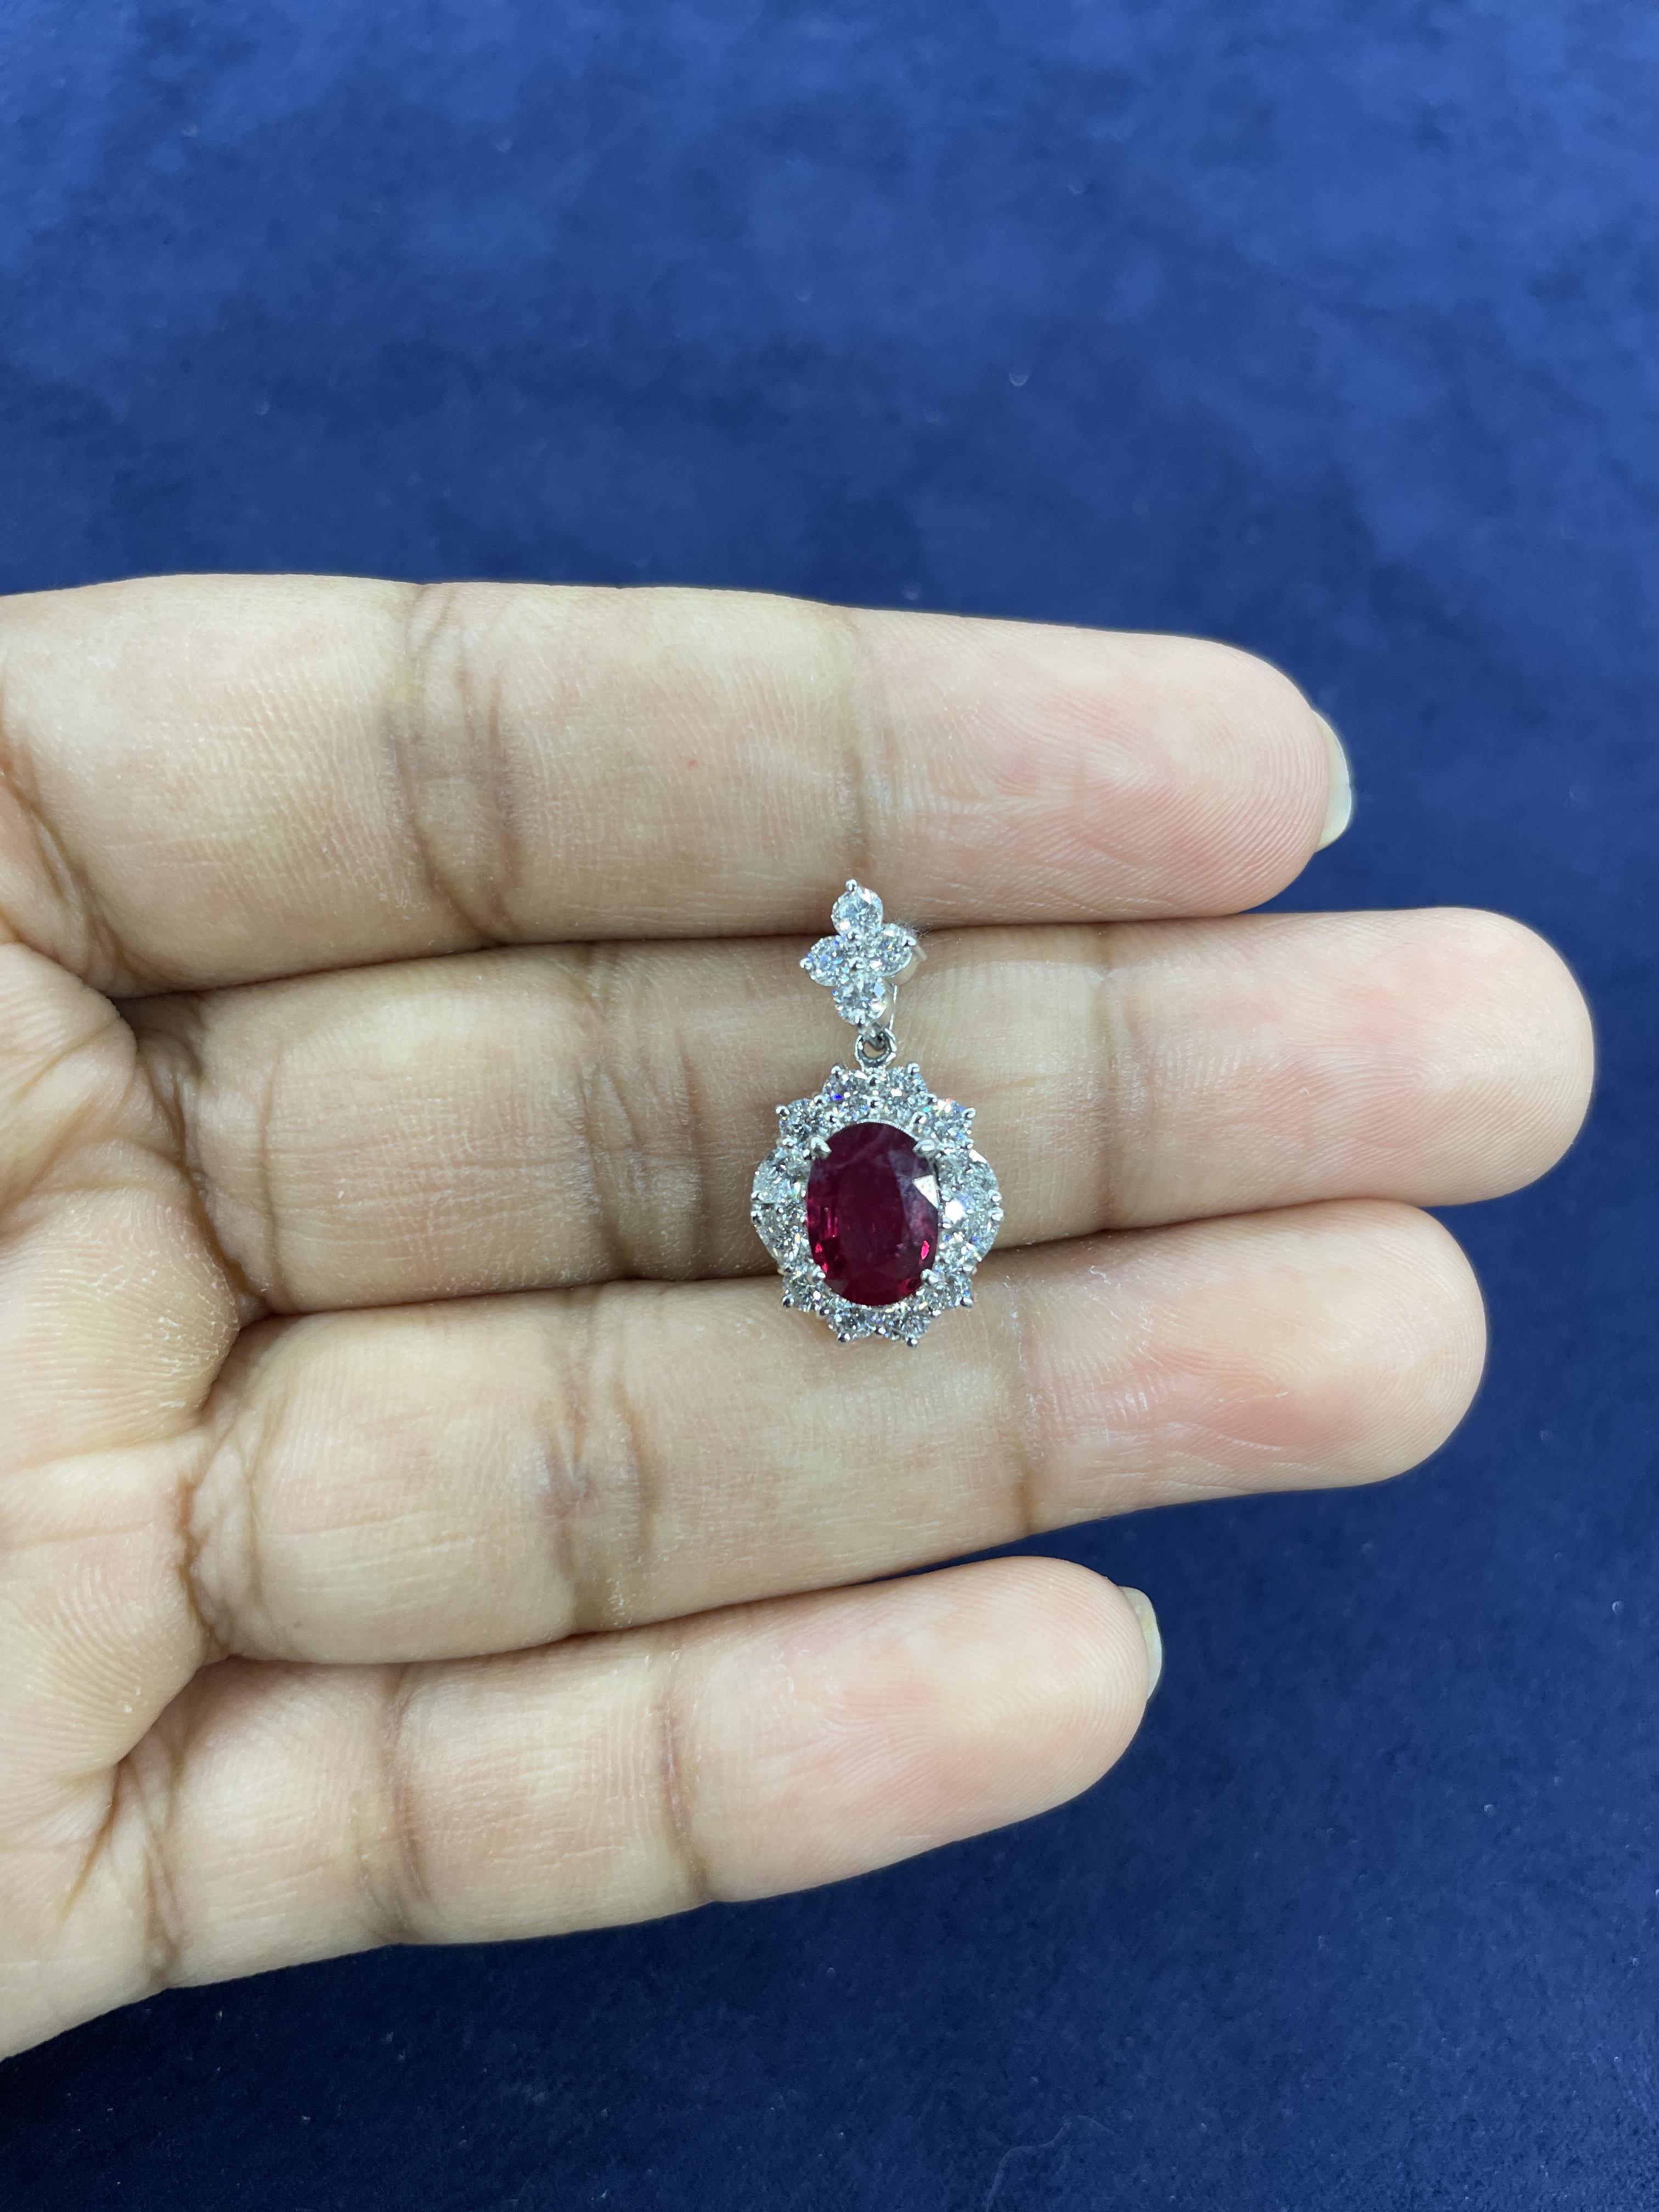 A RUBY AND DIAMOND CLUSTER PENDANT - Image 3 of 3